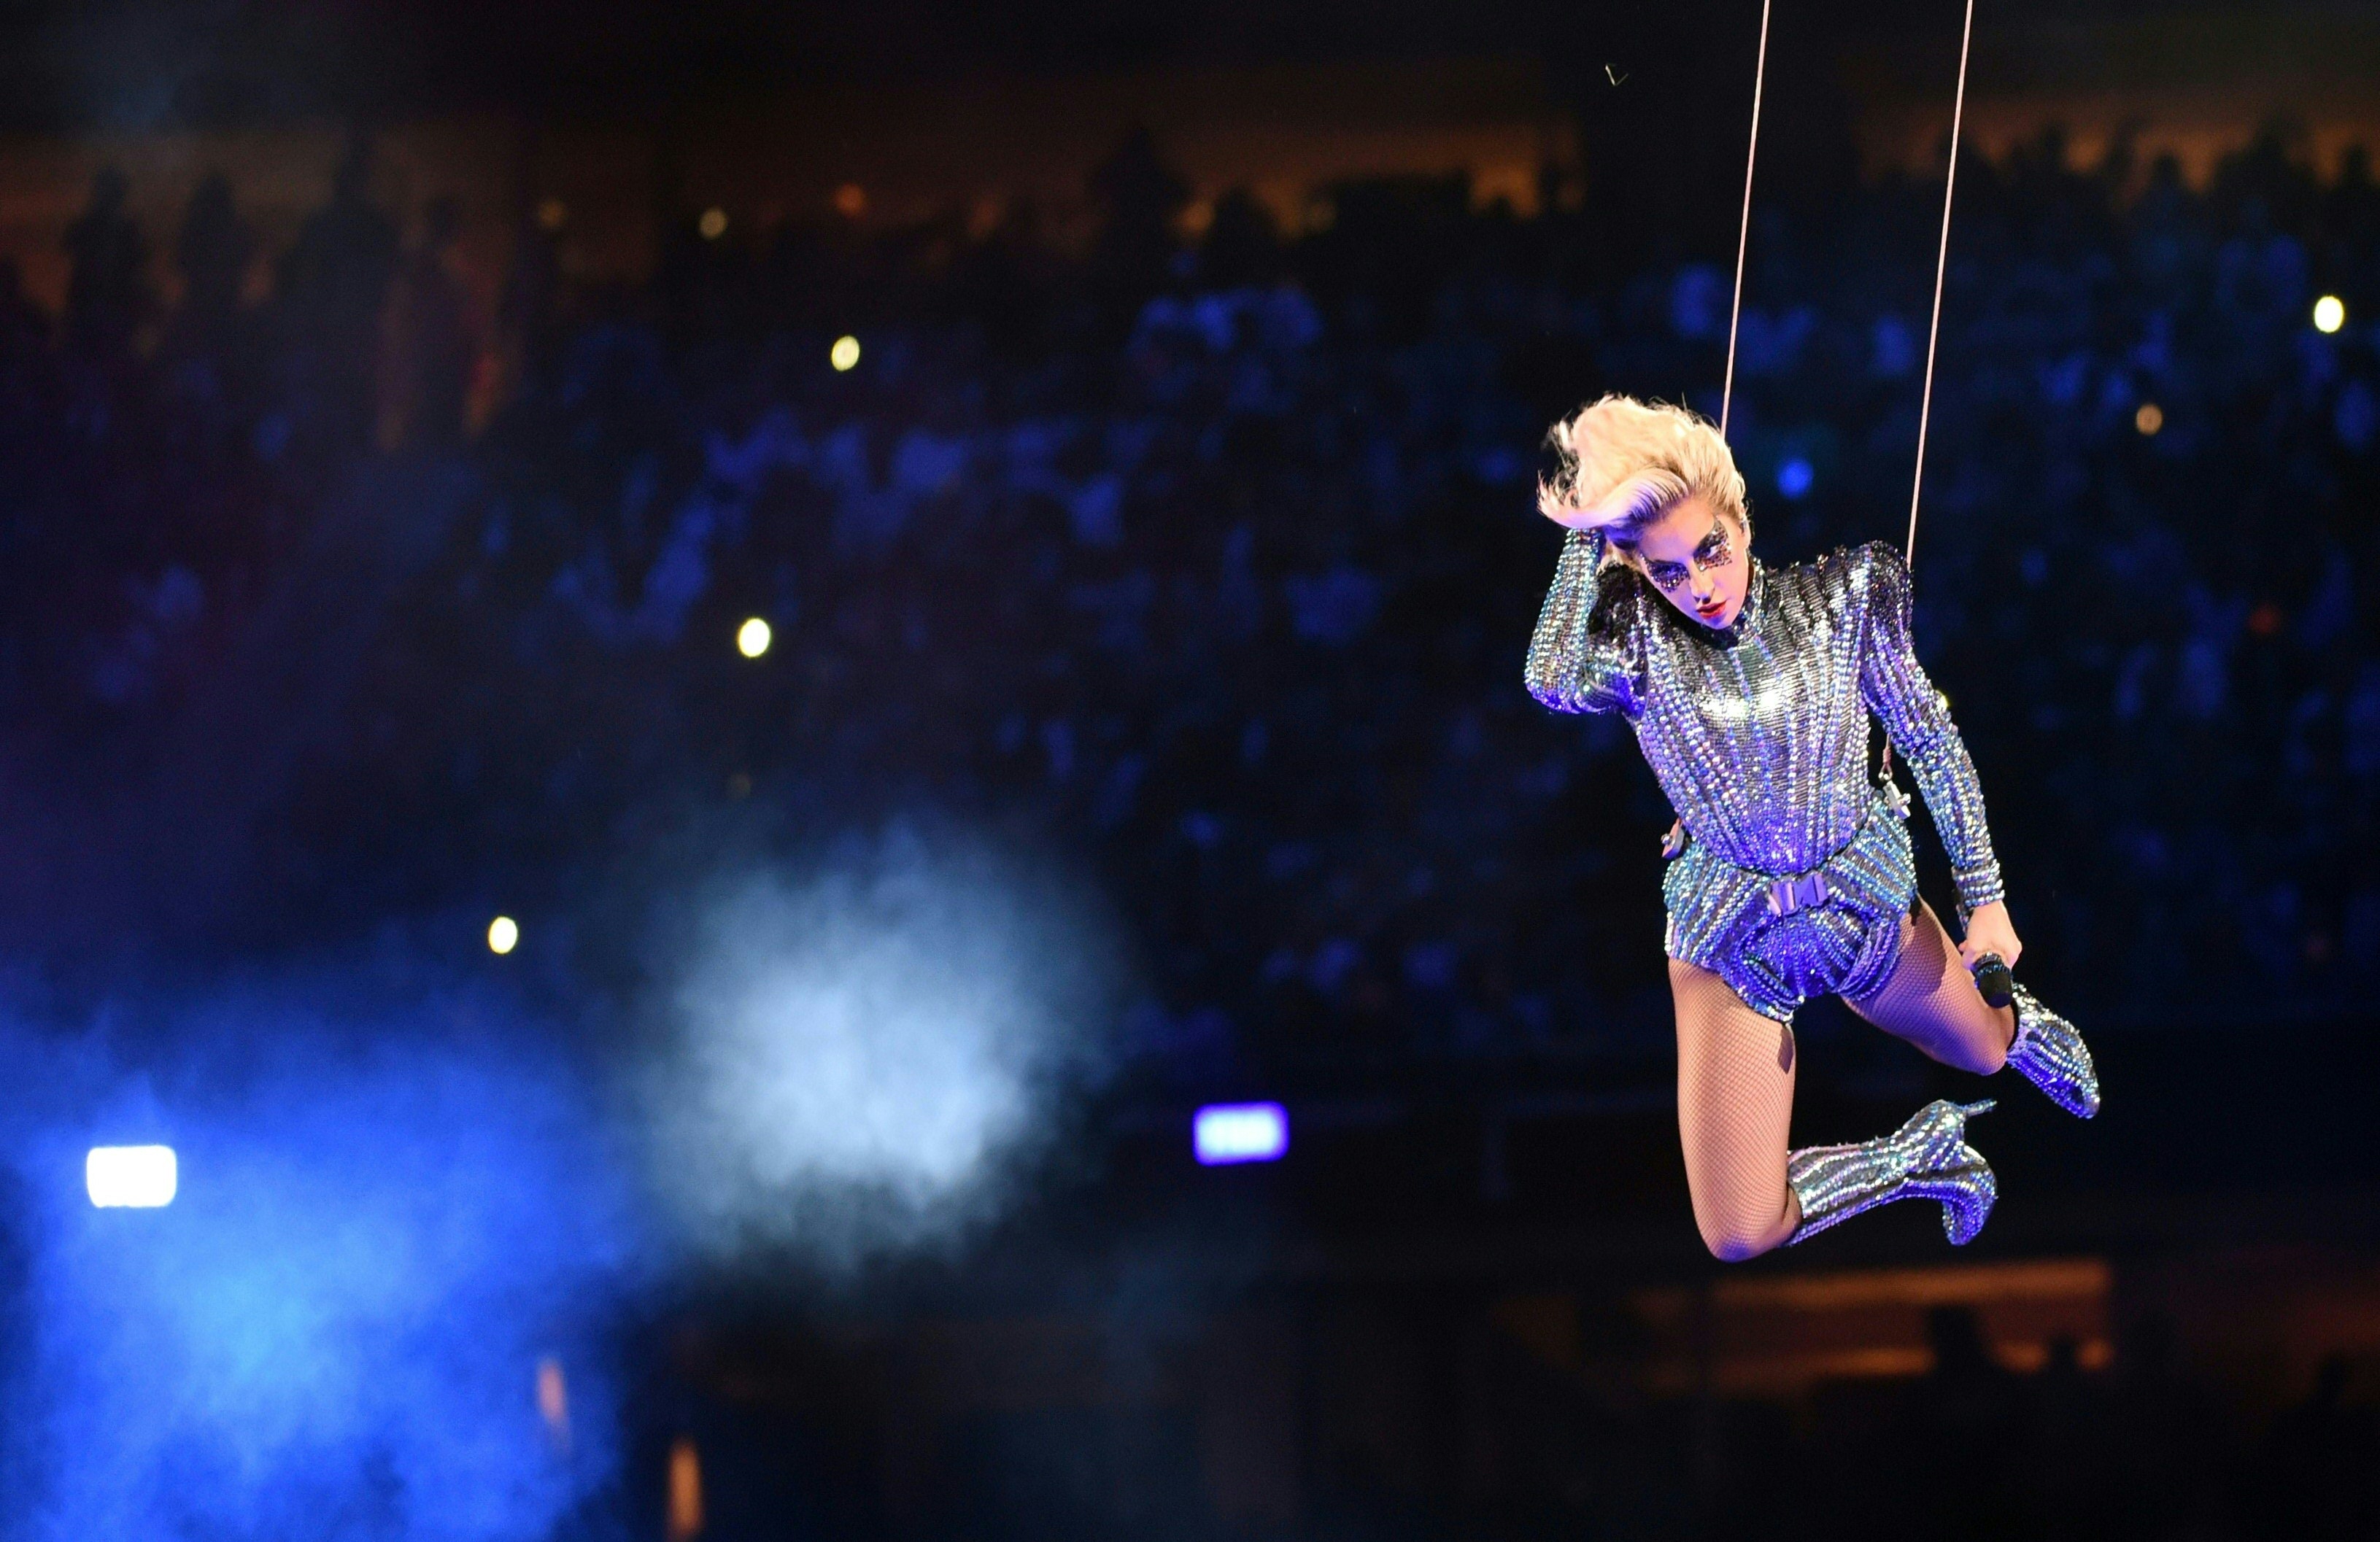 Singer Lady Gaga performs during the halftime show of Super Bowl LI at NGR Stadium in Houston, Texas, on February 5, 2017. / AFP PHOTO / Timothy A. CLARY (Photo credit should read TIMOTHY A. CLARY/AFP/Getty Images)